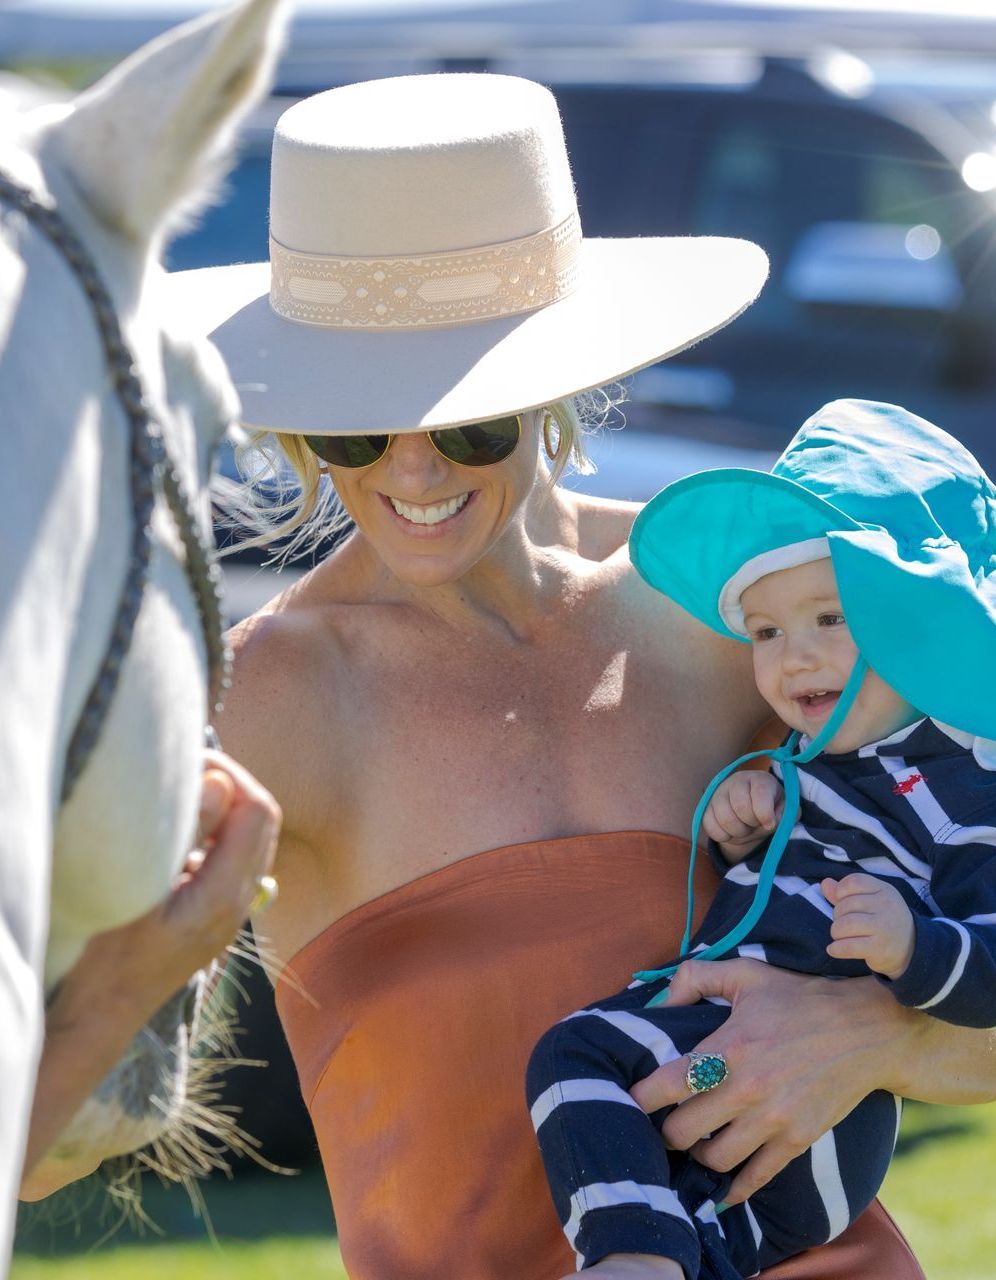 A woman in a hat is holding a baby in front of a horse